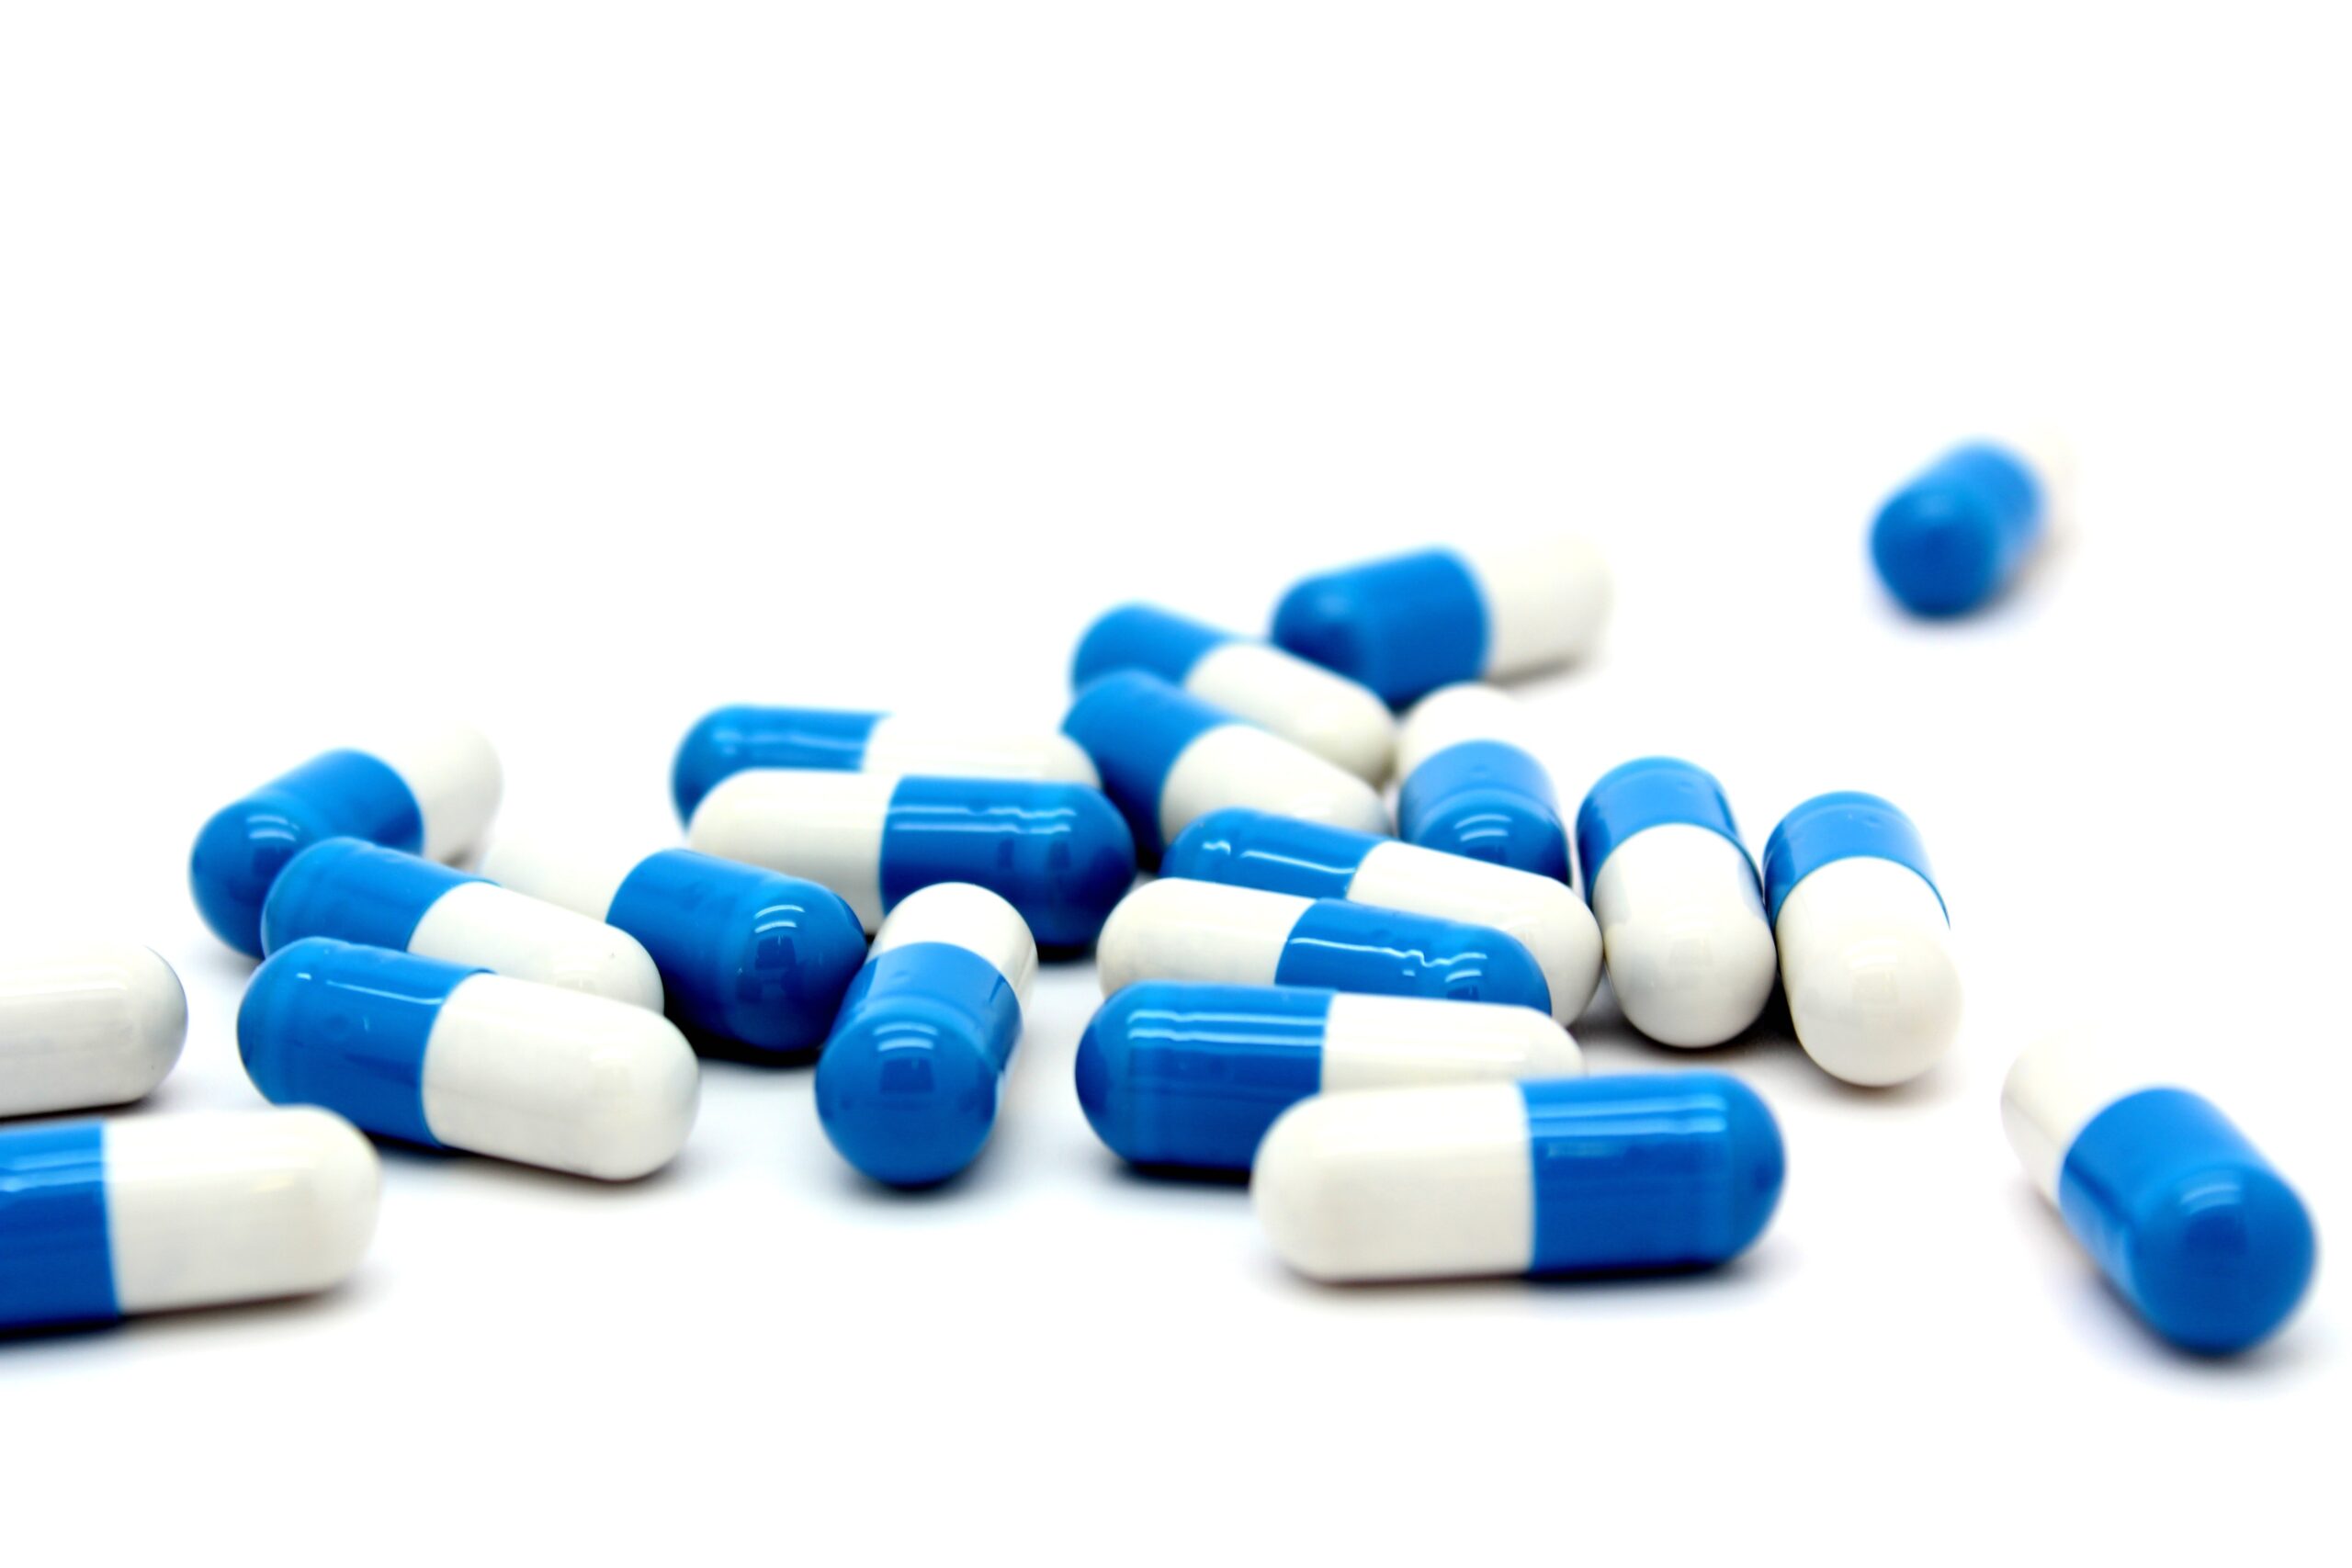 A collection of blue and white capsules, representing consequences of Drug DWI, scattered on a white background.